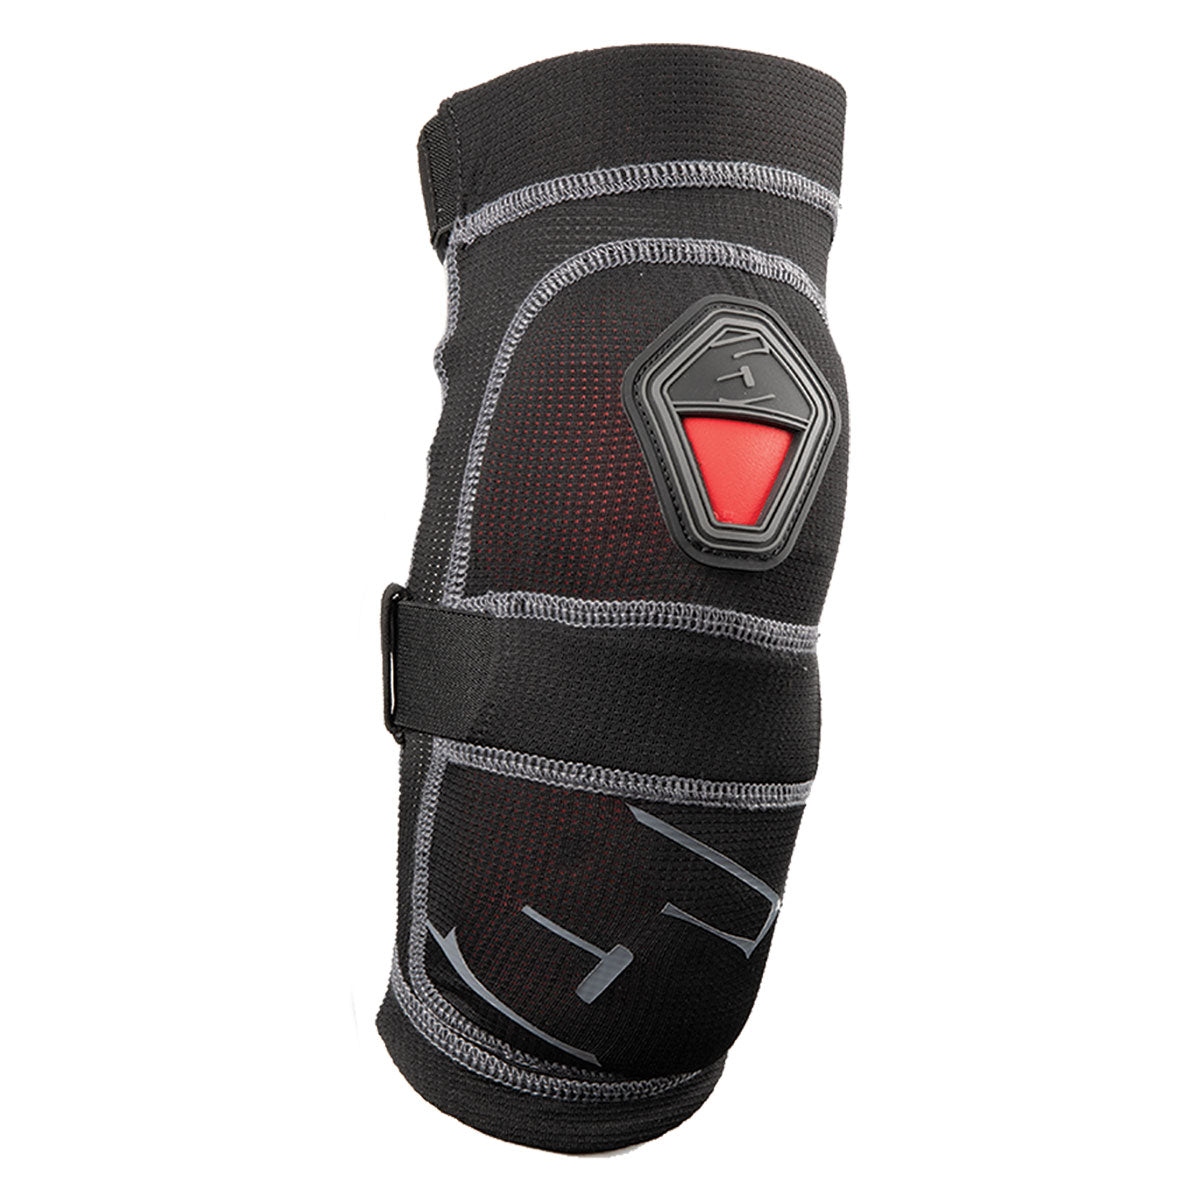 509 R - Mor Protective Elbow Pad F12000500-120-001